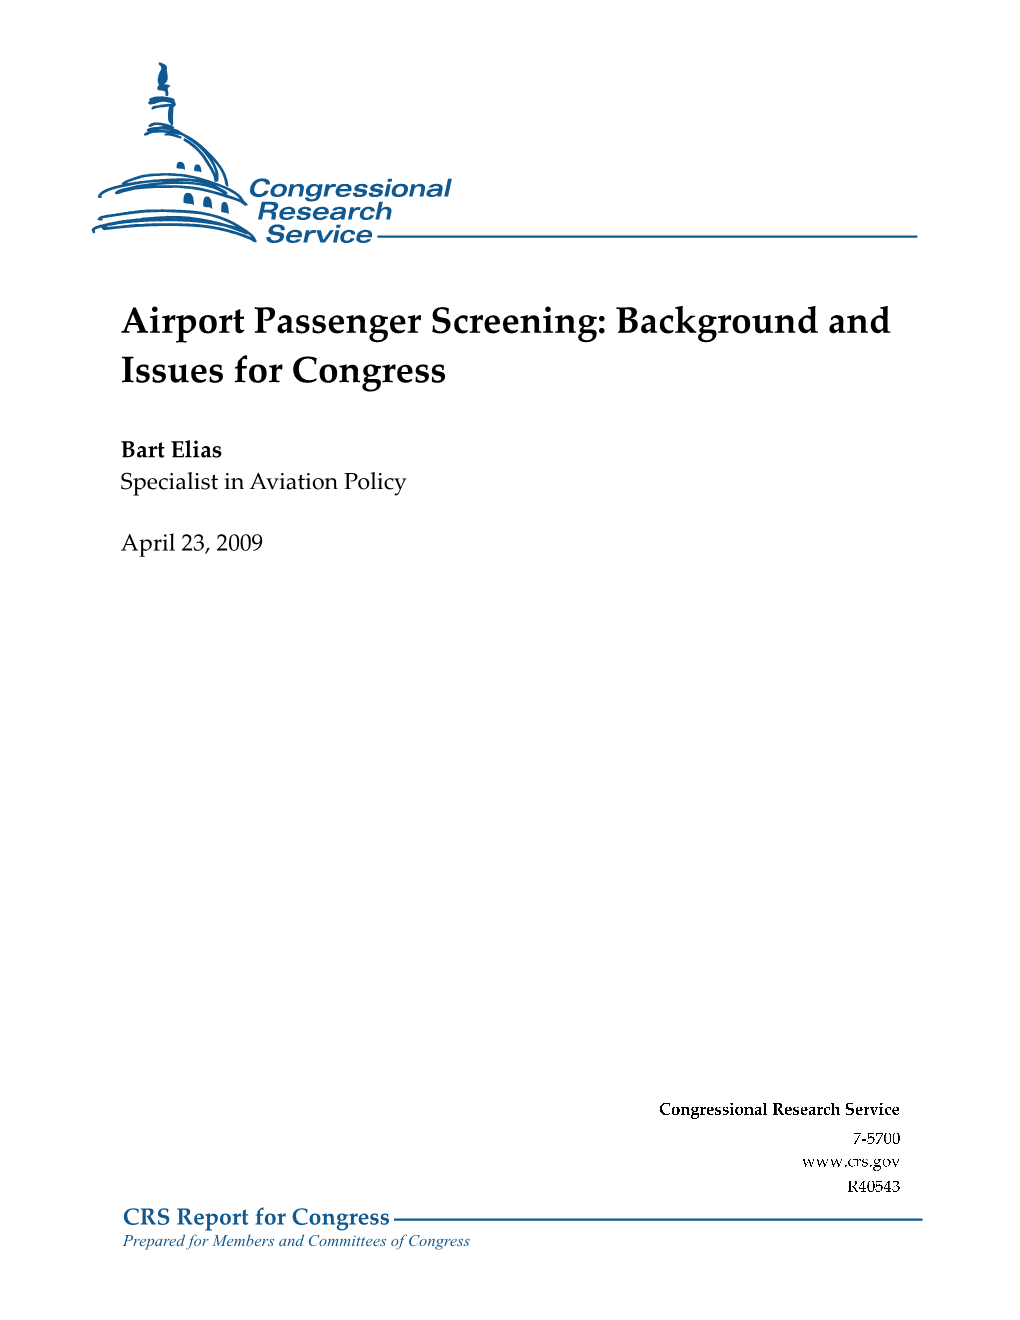 Airport Passenger Screening: Background and Issues for Congress